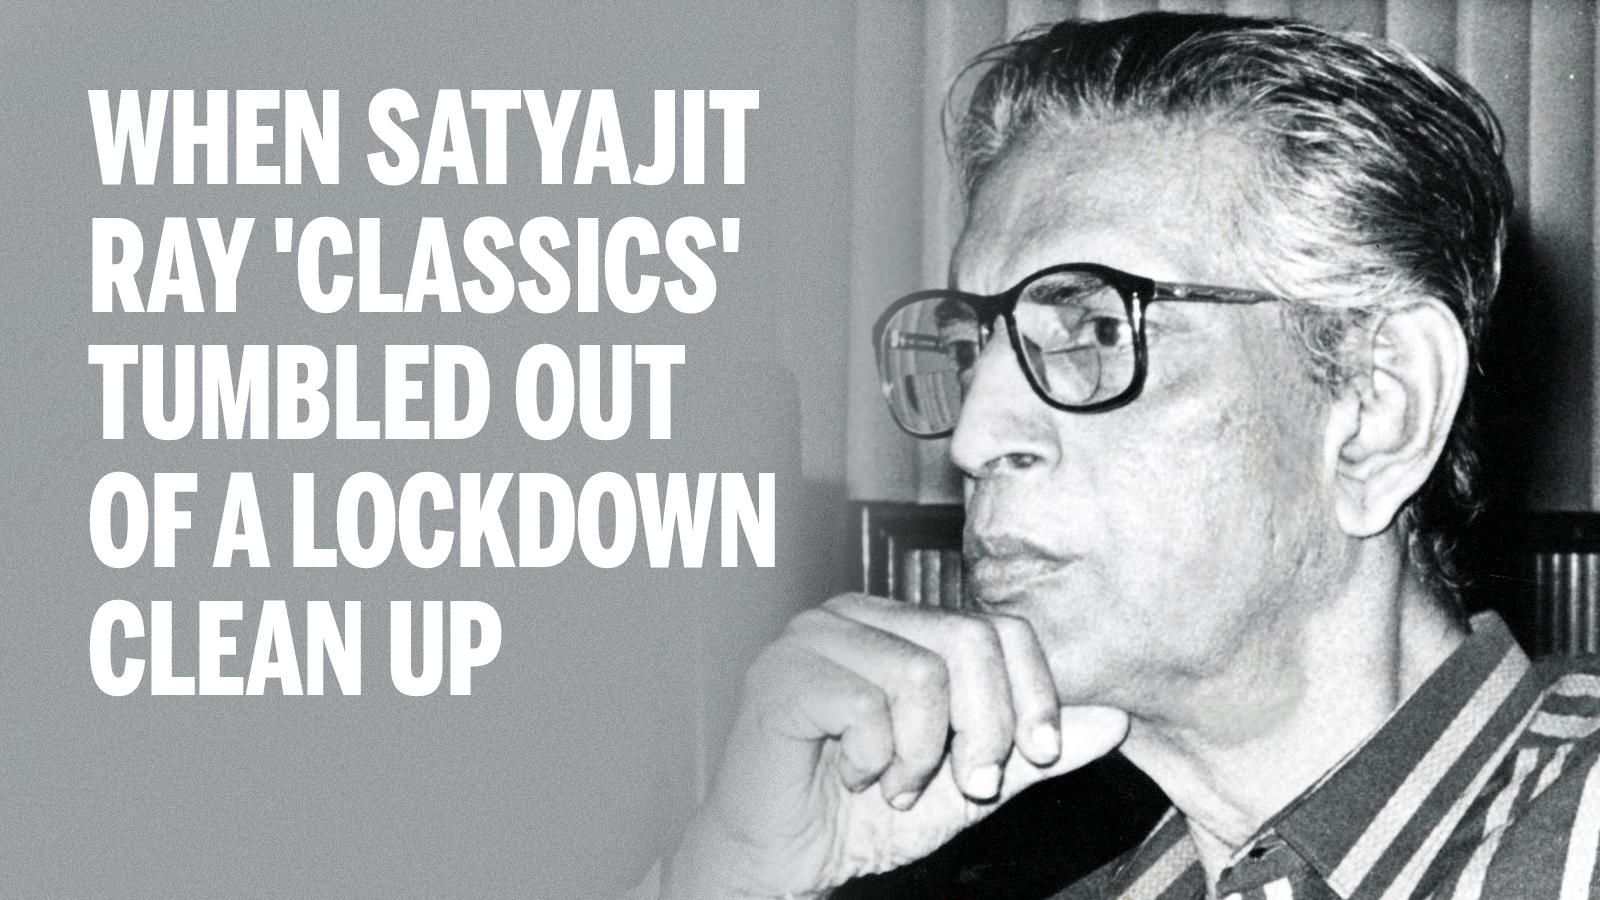 When Satyajit Ray 'classics' tumbled out of a lockdown clean up